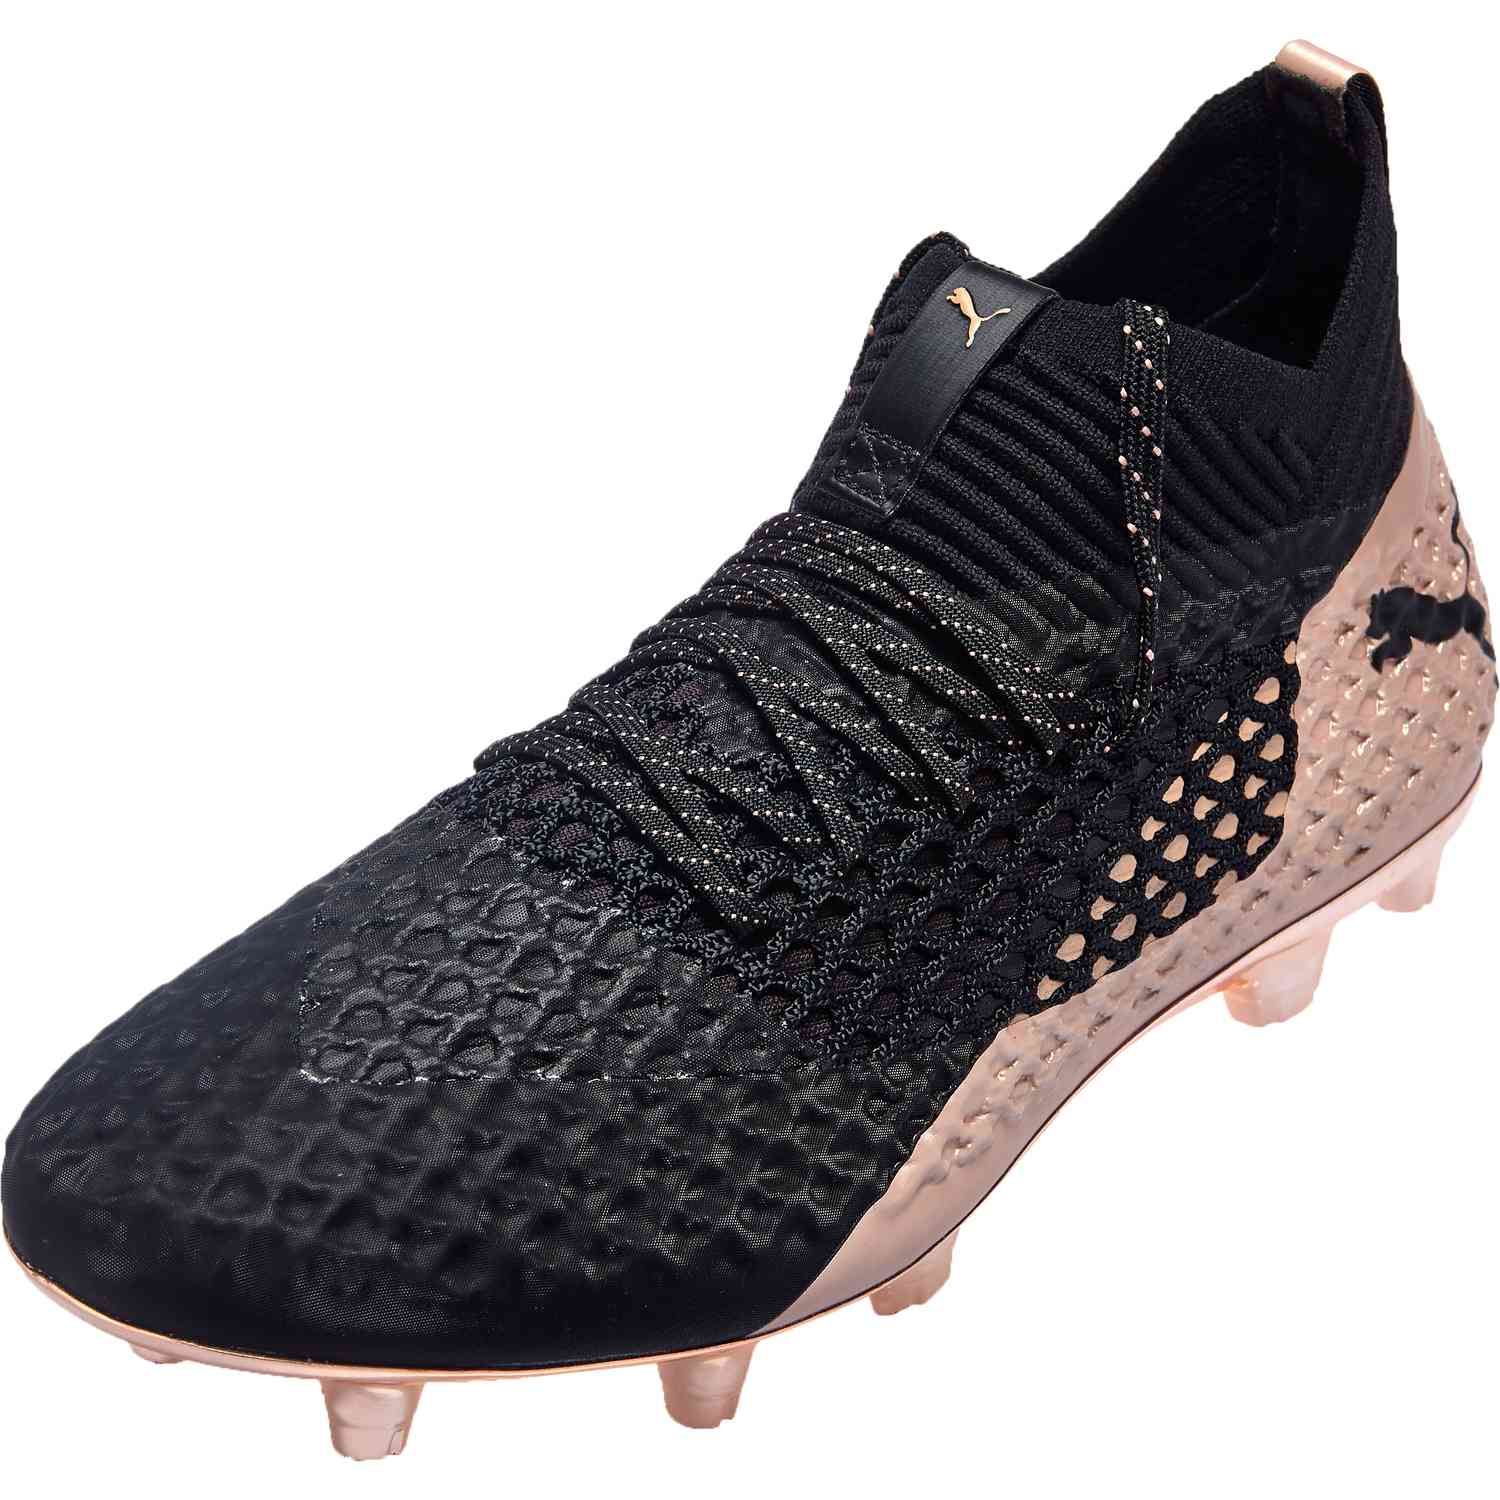 rose gold soccer cleats